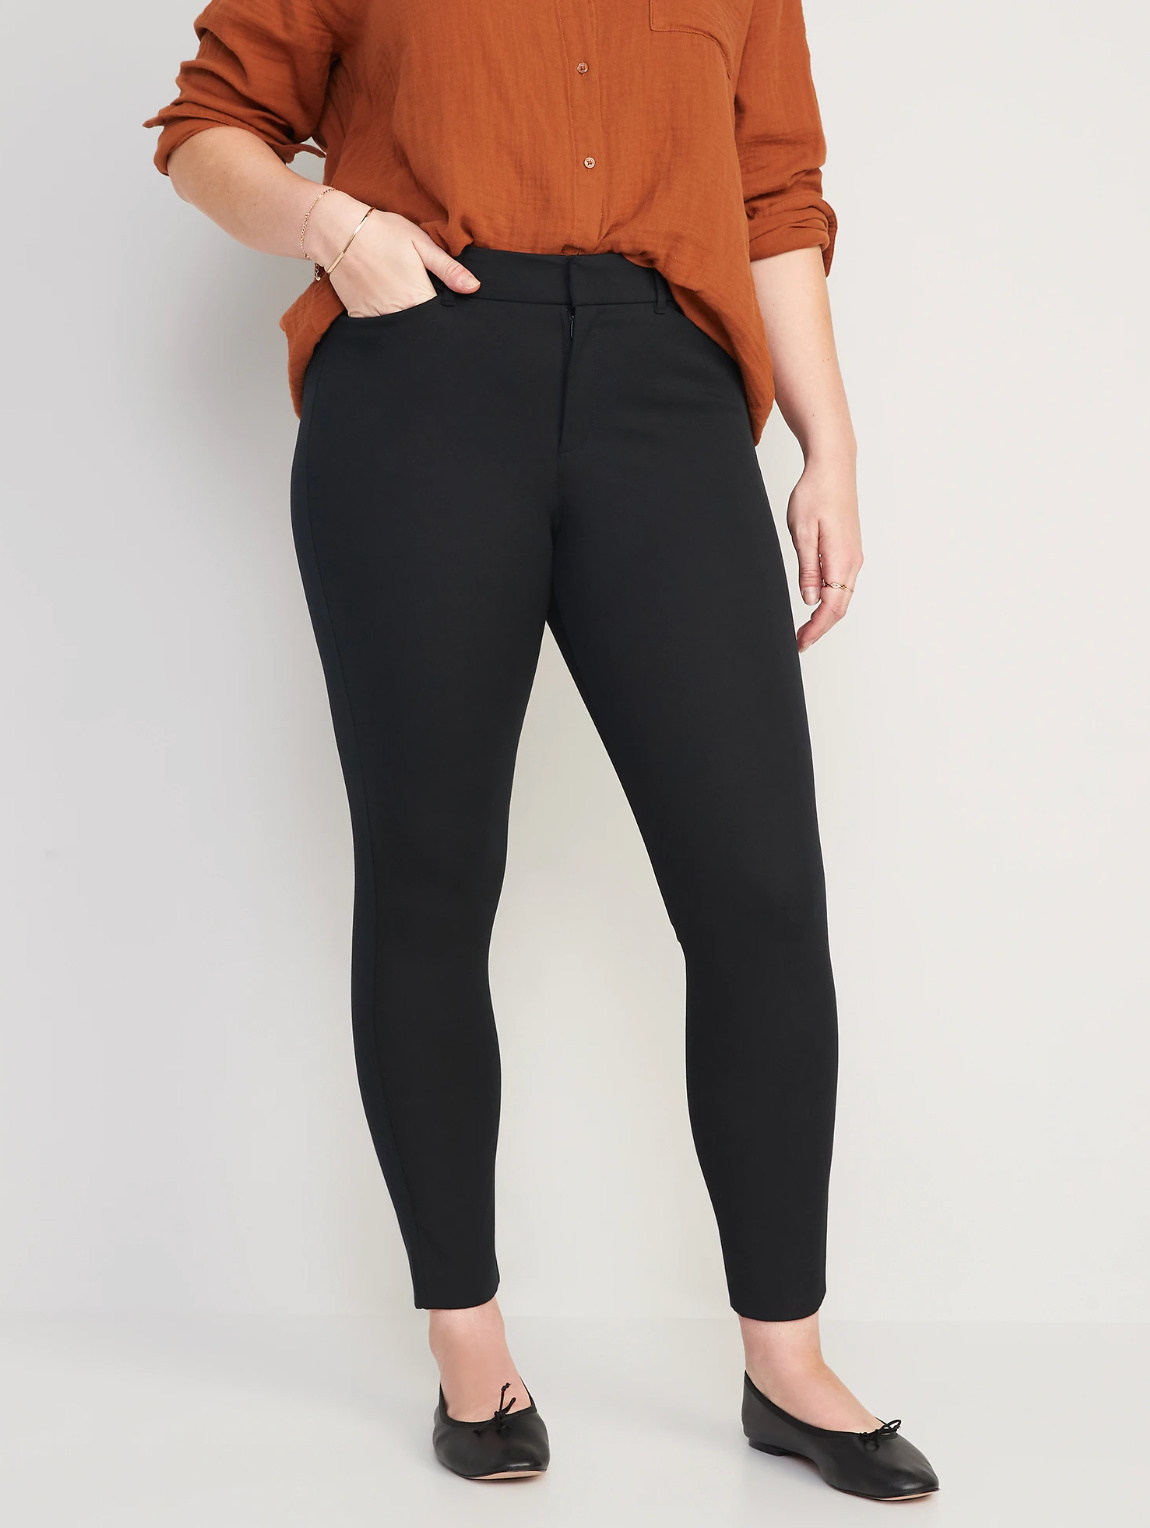 Chico's Travelers pants brown - $28 - From J